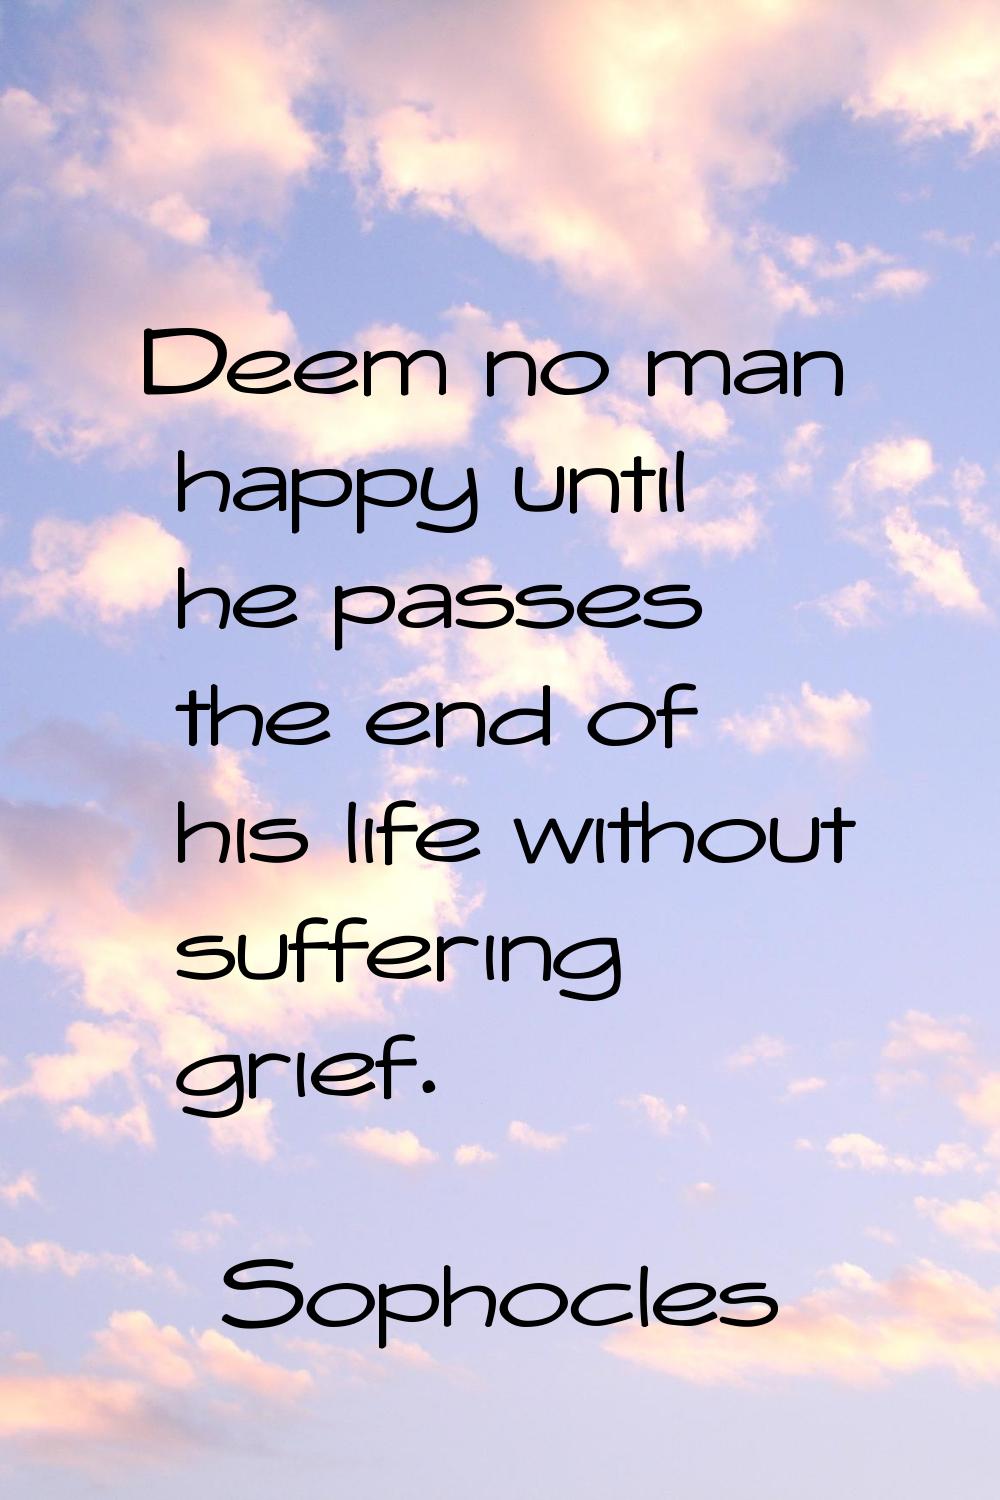 Deem no man happy until he passes the end of his life without suffering grief.